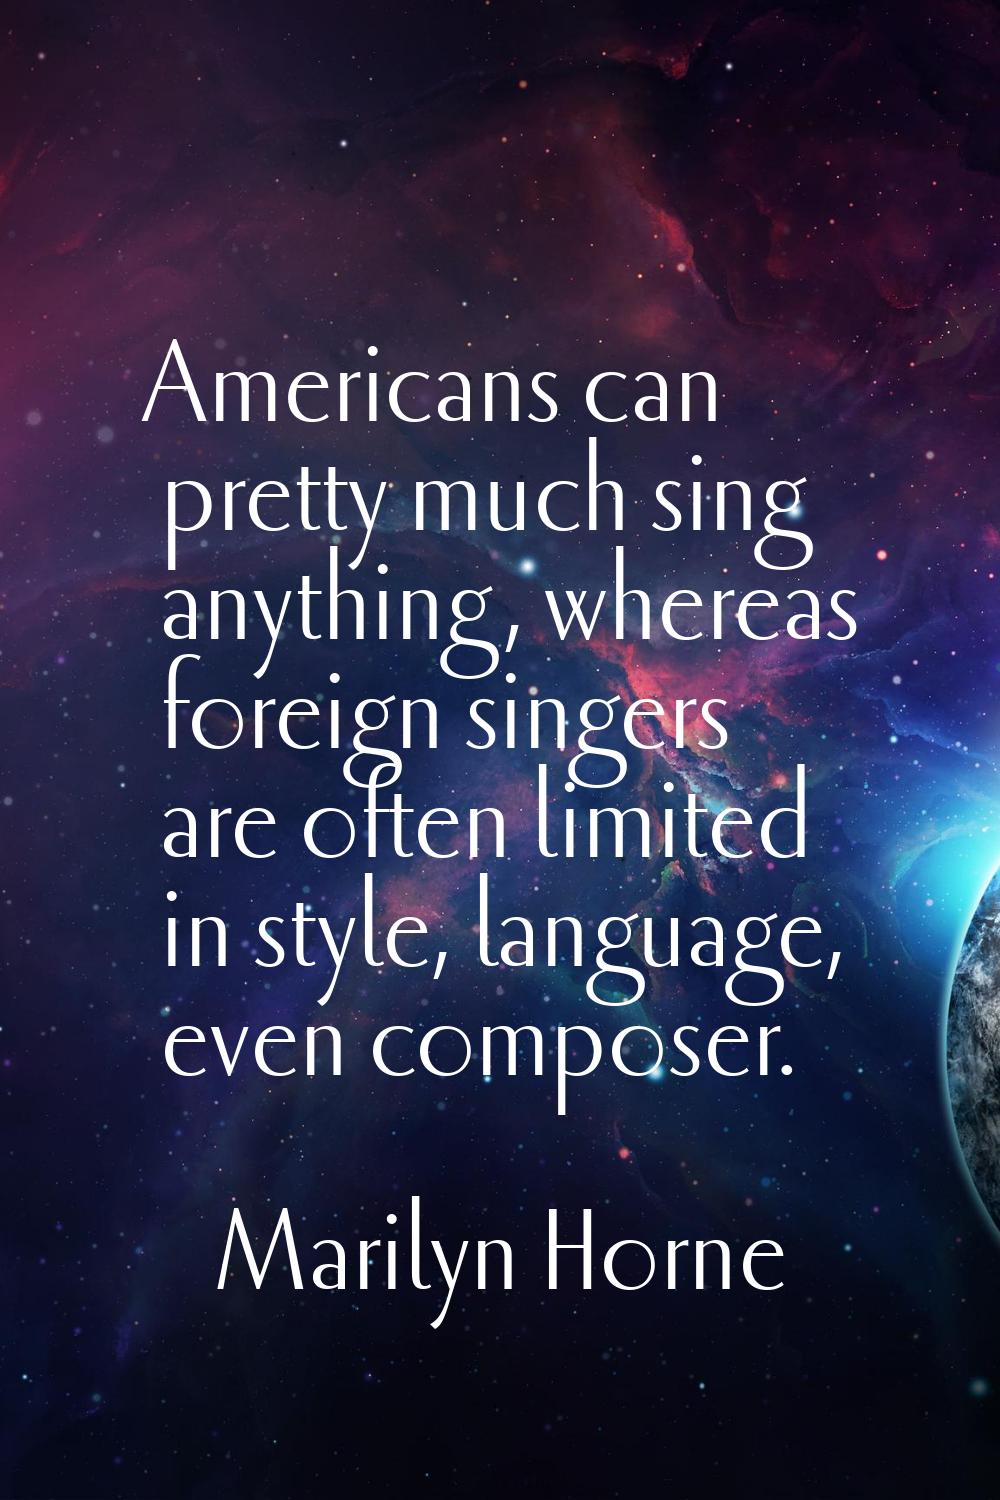 Americans can pretty much sing anything, whereas foreign singers are often limited in style, langua